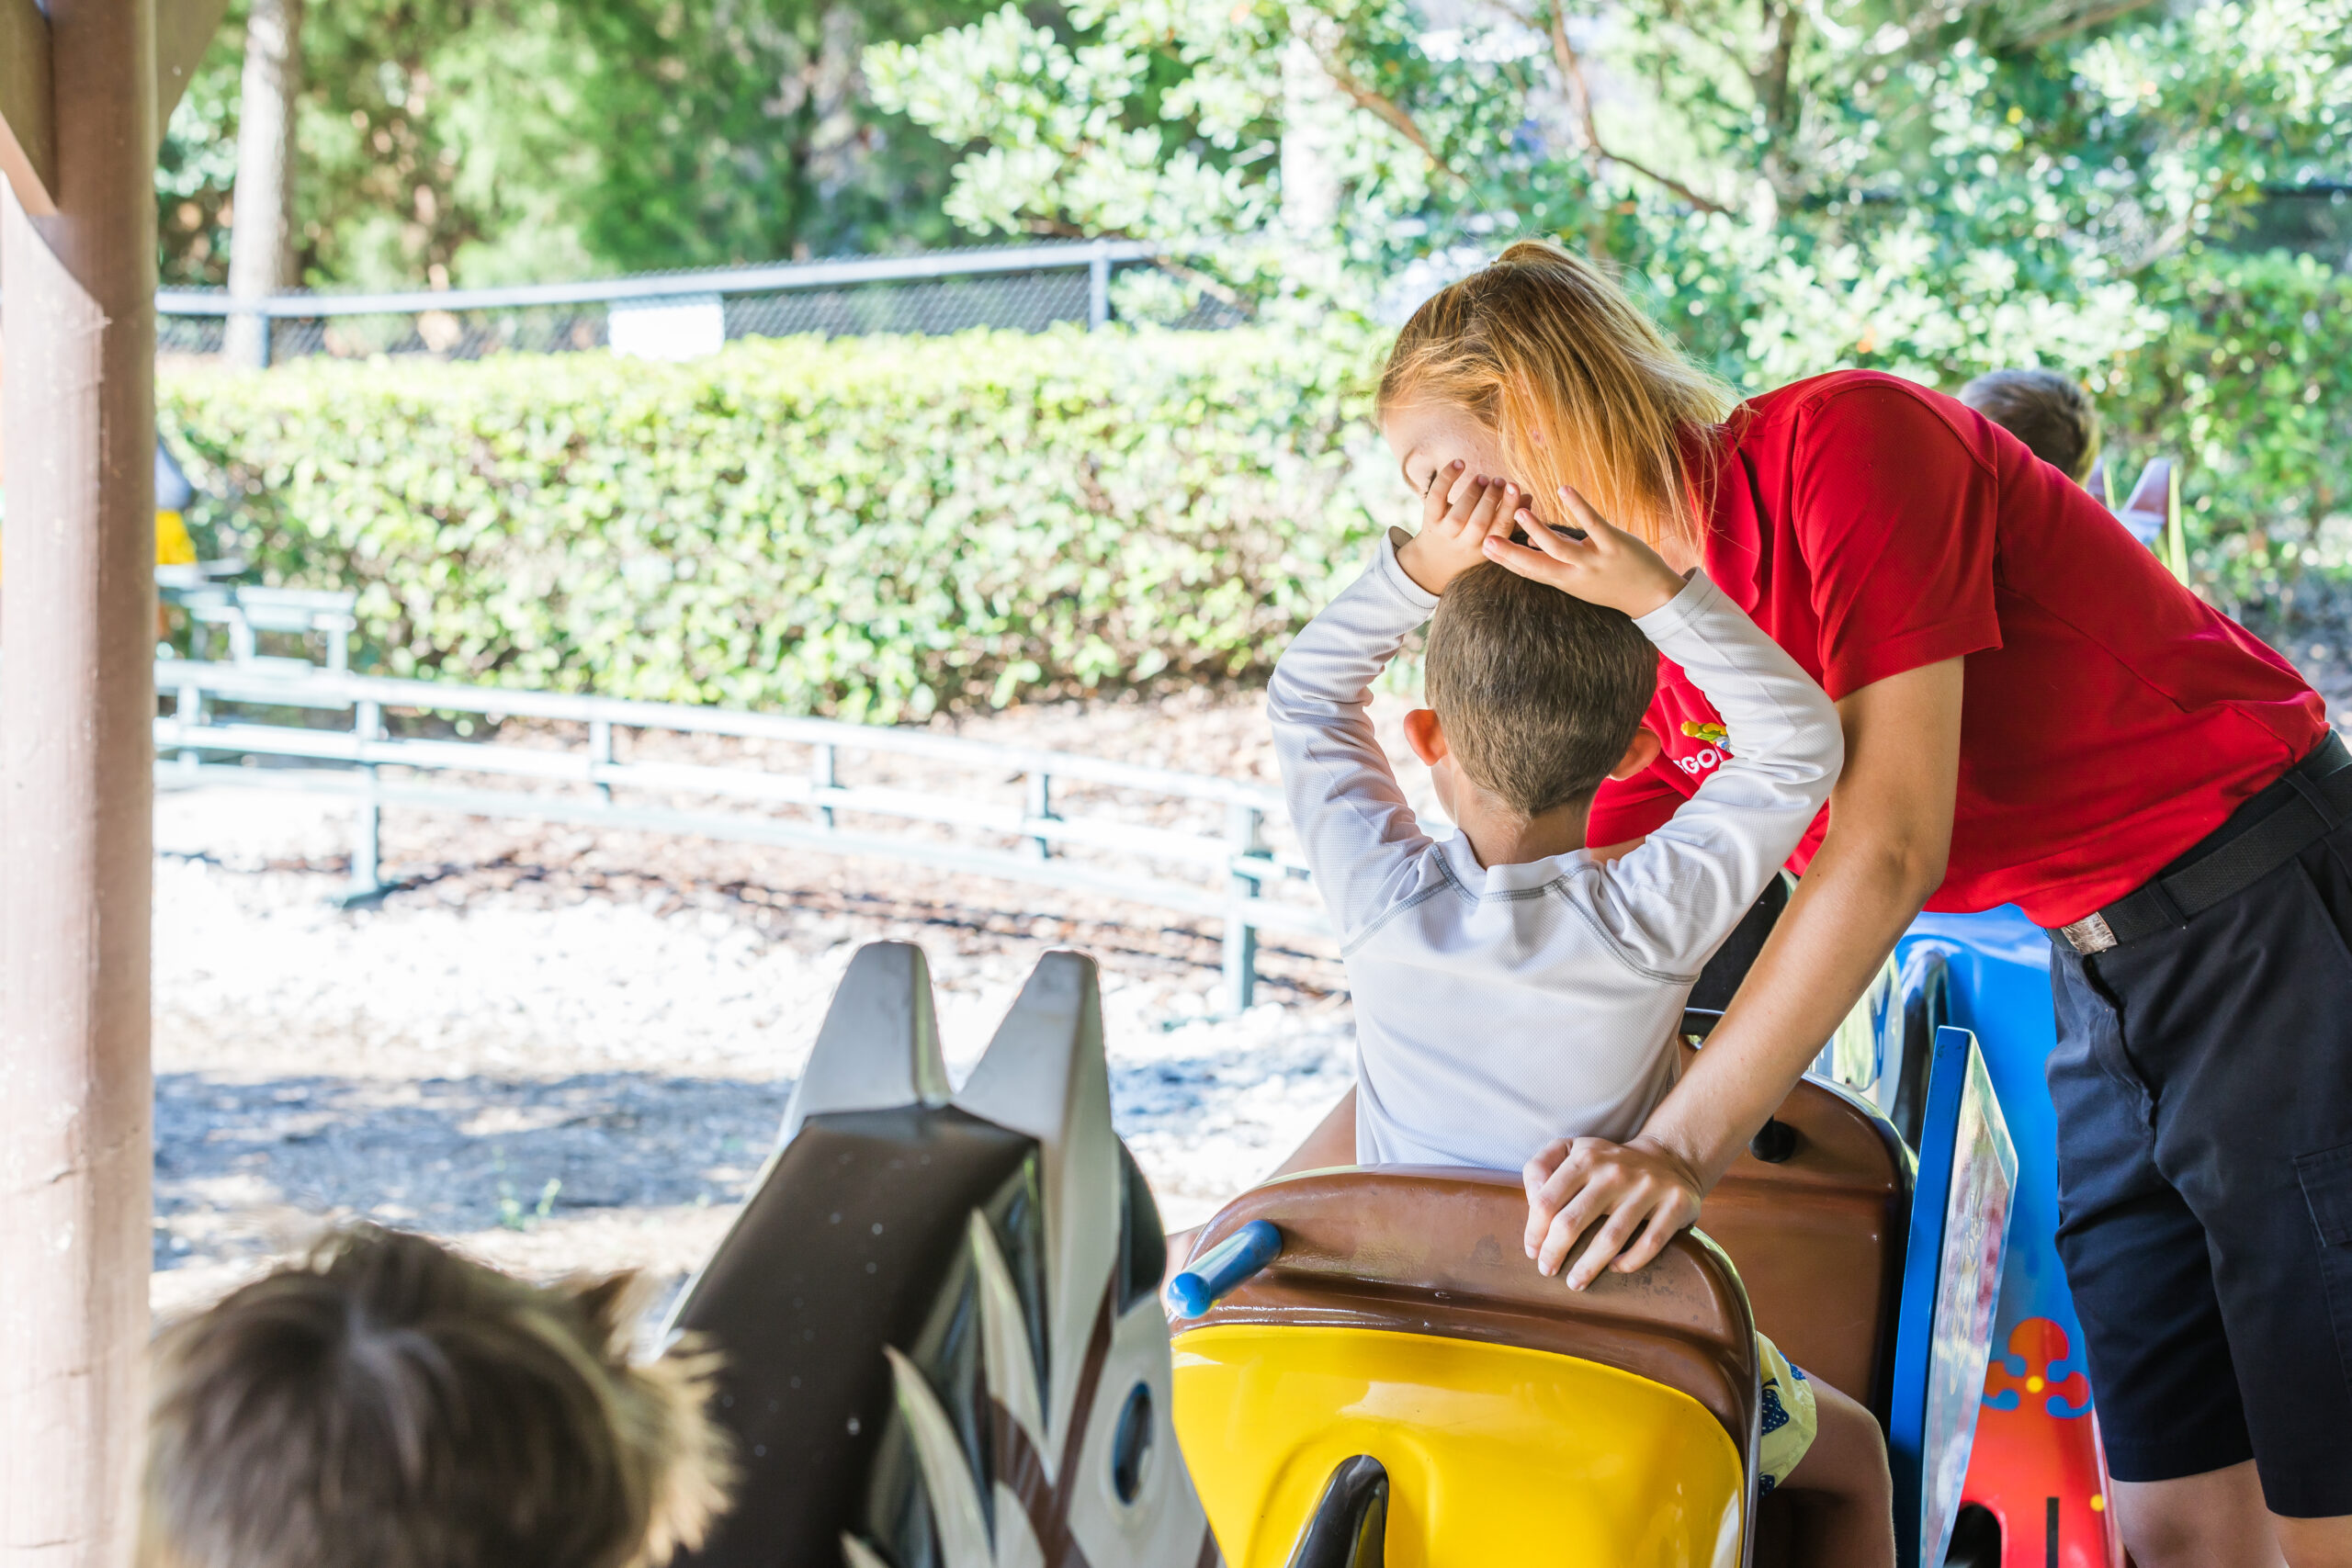 5 Things to Know Before Going to Legoland with your Special Needs kid! #legoland #legolandfl #specialneedslegoland #legospecialneeds #autismlegoland